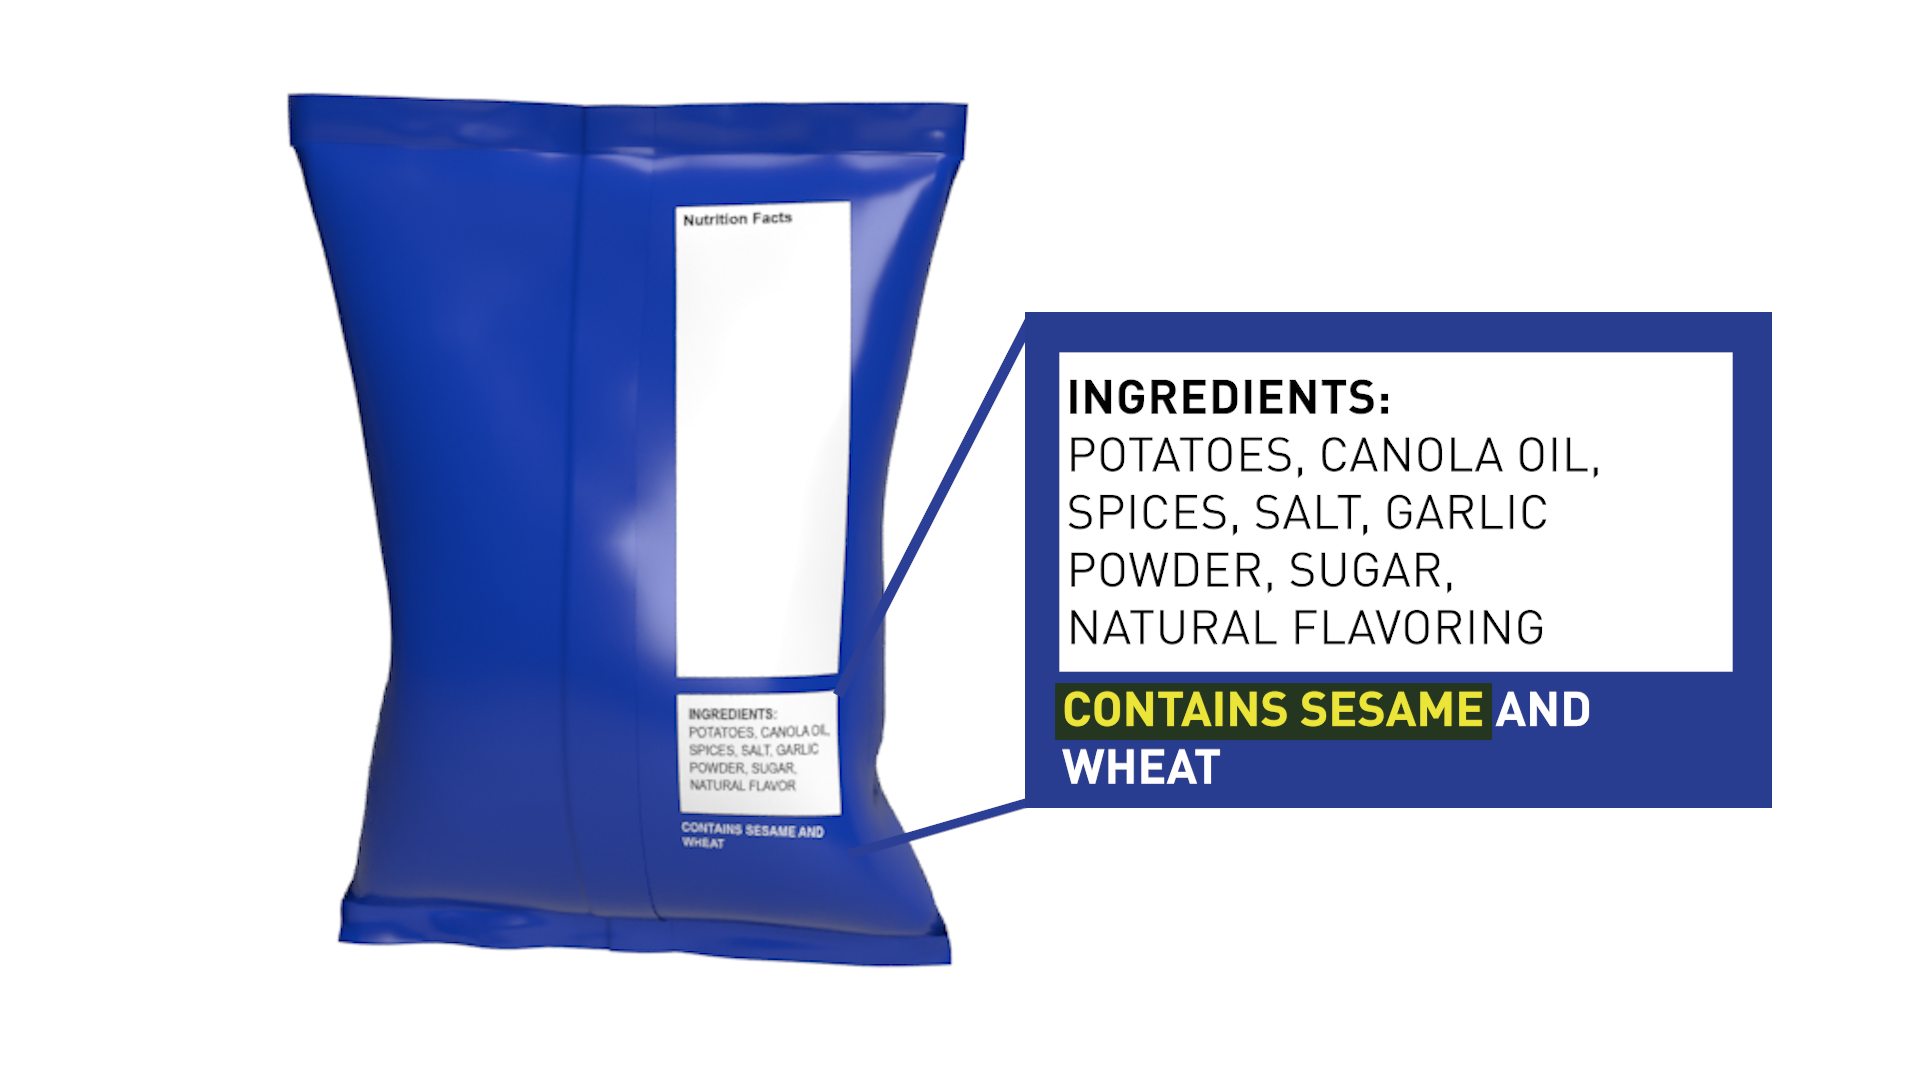 Dark blue bag of chips with close up of ingredients label / contains statement.